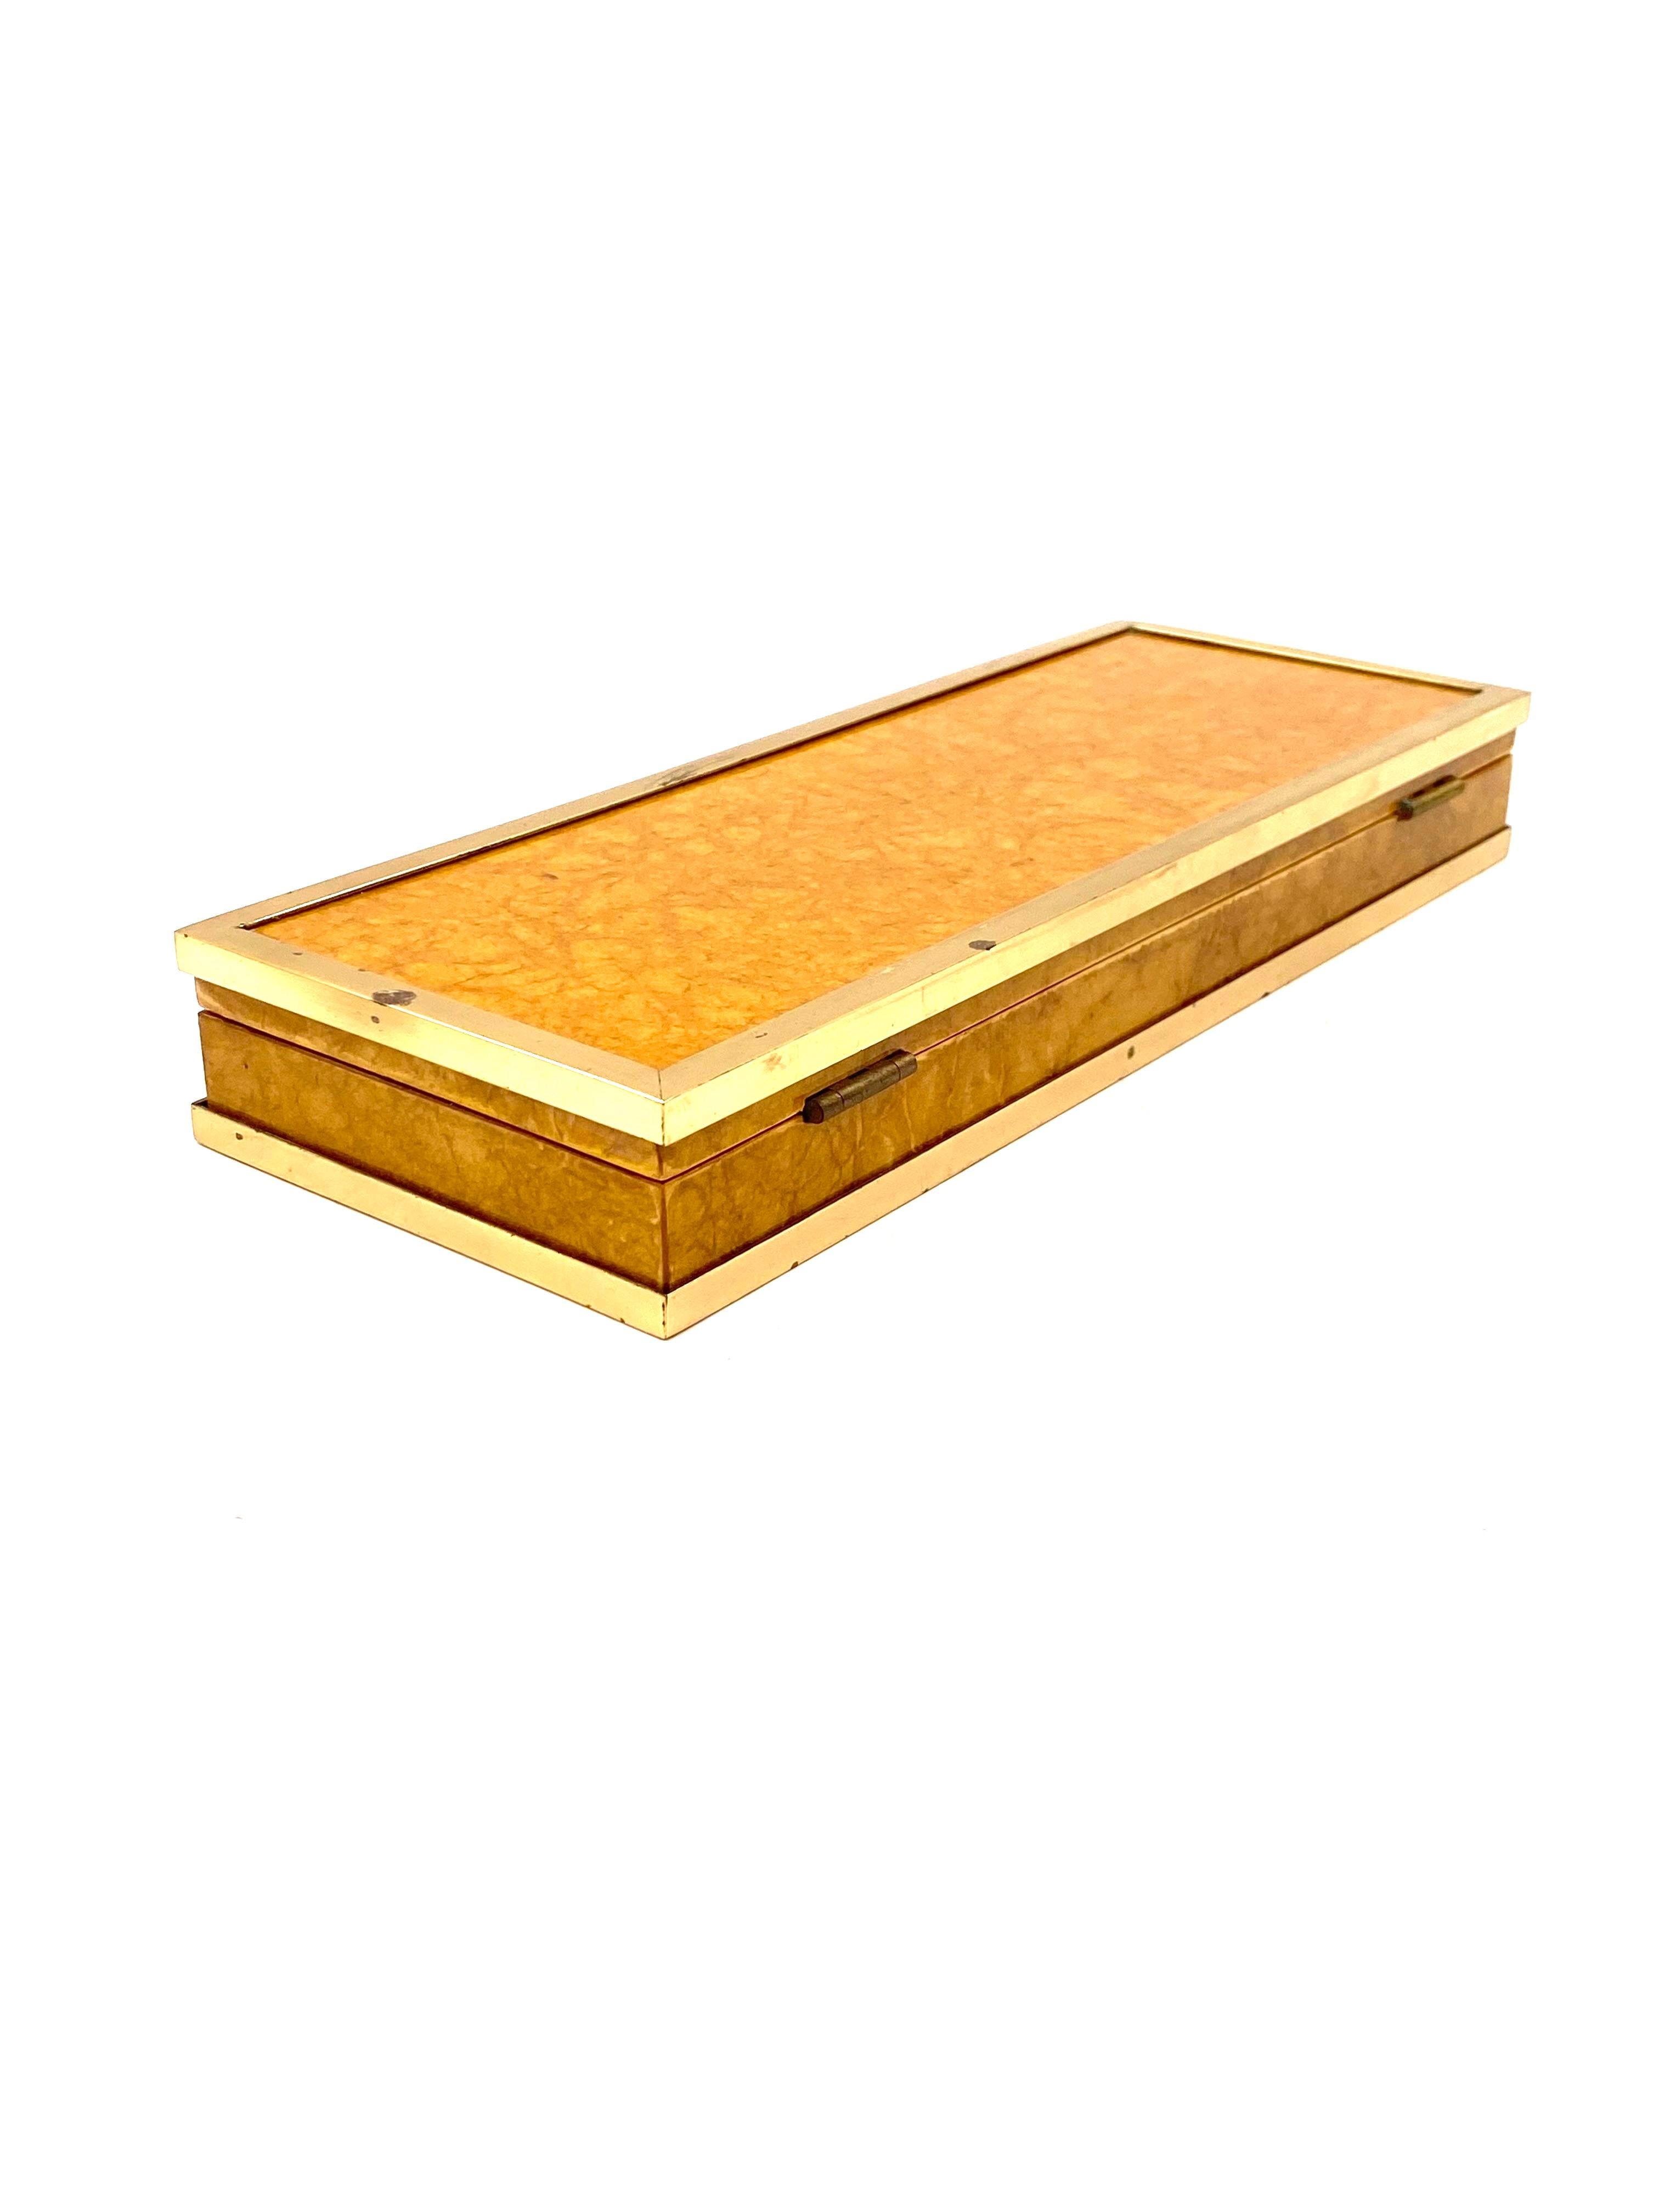 Tommaso Barbi, Wood and Brass Cigars Box, Italy, 1970 For Sale 9